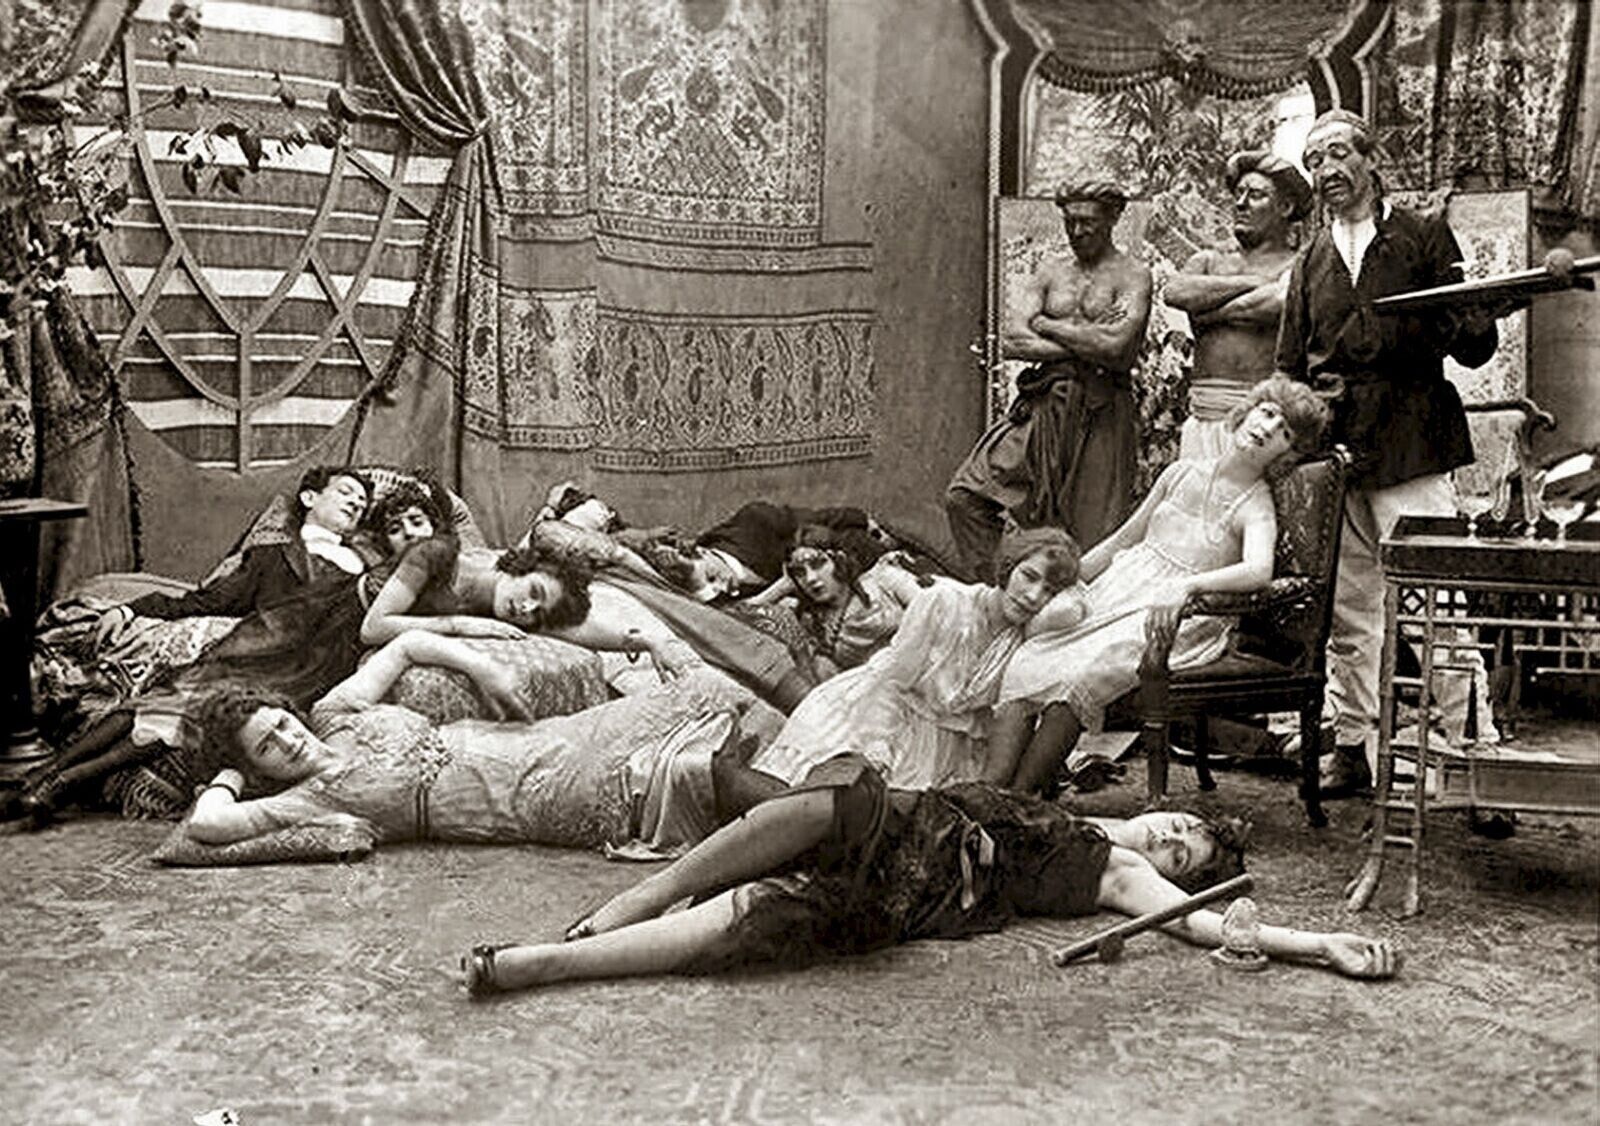 1918 FRENCH OPIUM Den Drug Party Classic Historic Picture Photo 8x10